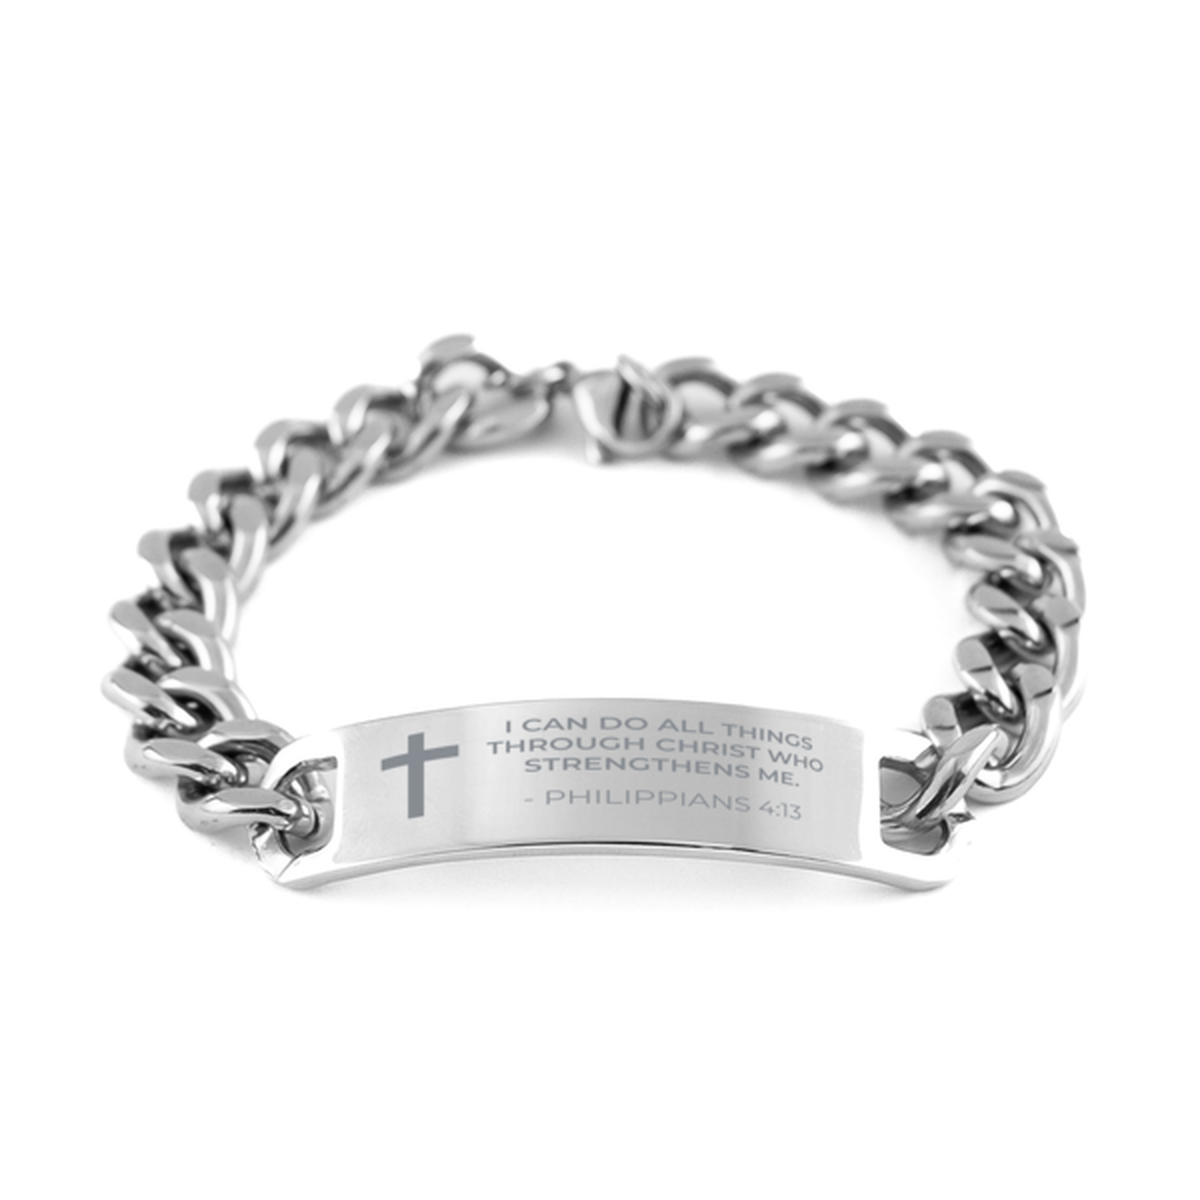 Bible Verse Chain Stainless Steel Bracelet, Philippians 4:13 I Can Do All Things Through Christ Who, Inspirational Christian Gifts For Men Women